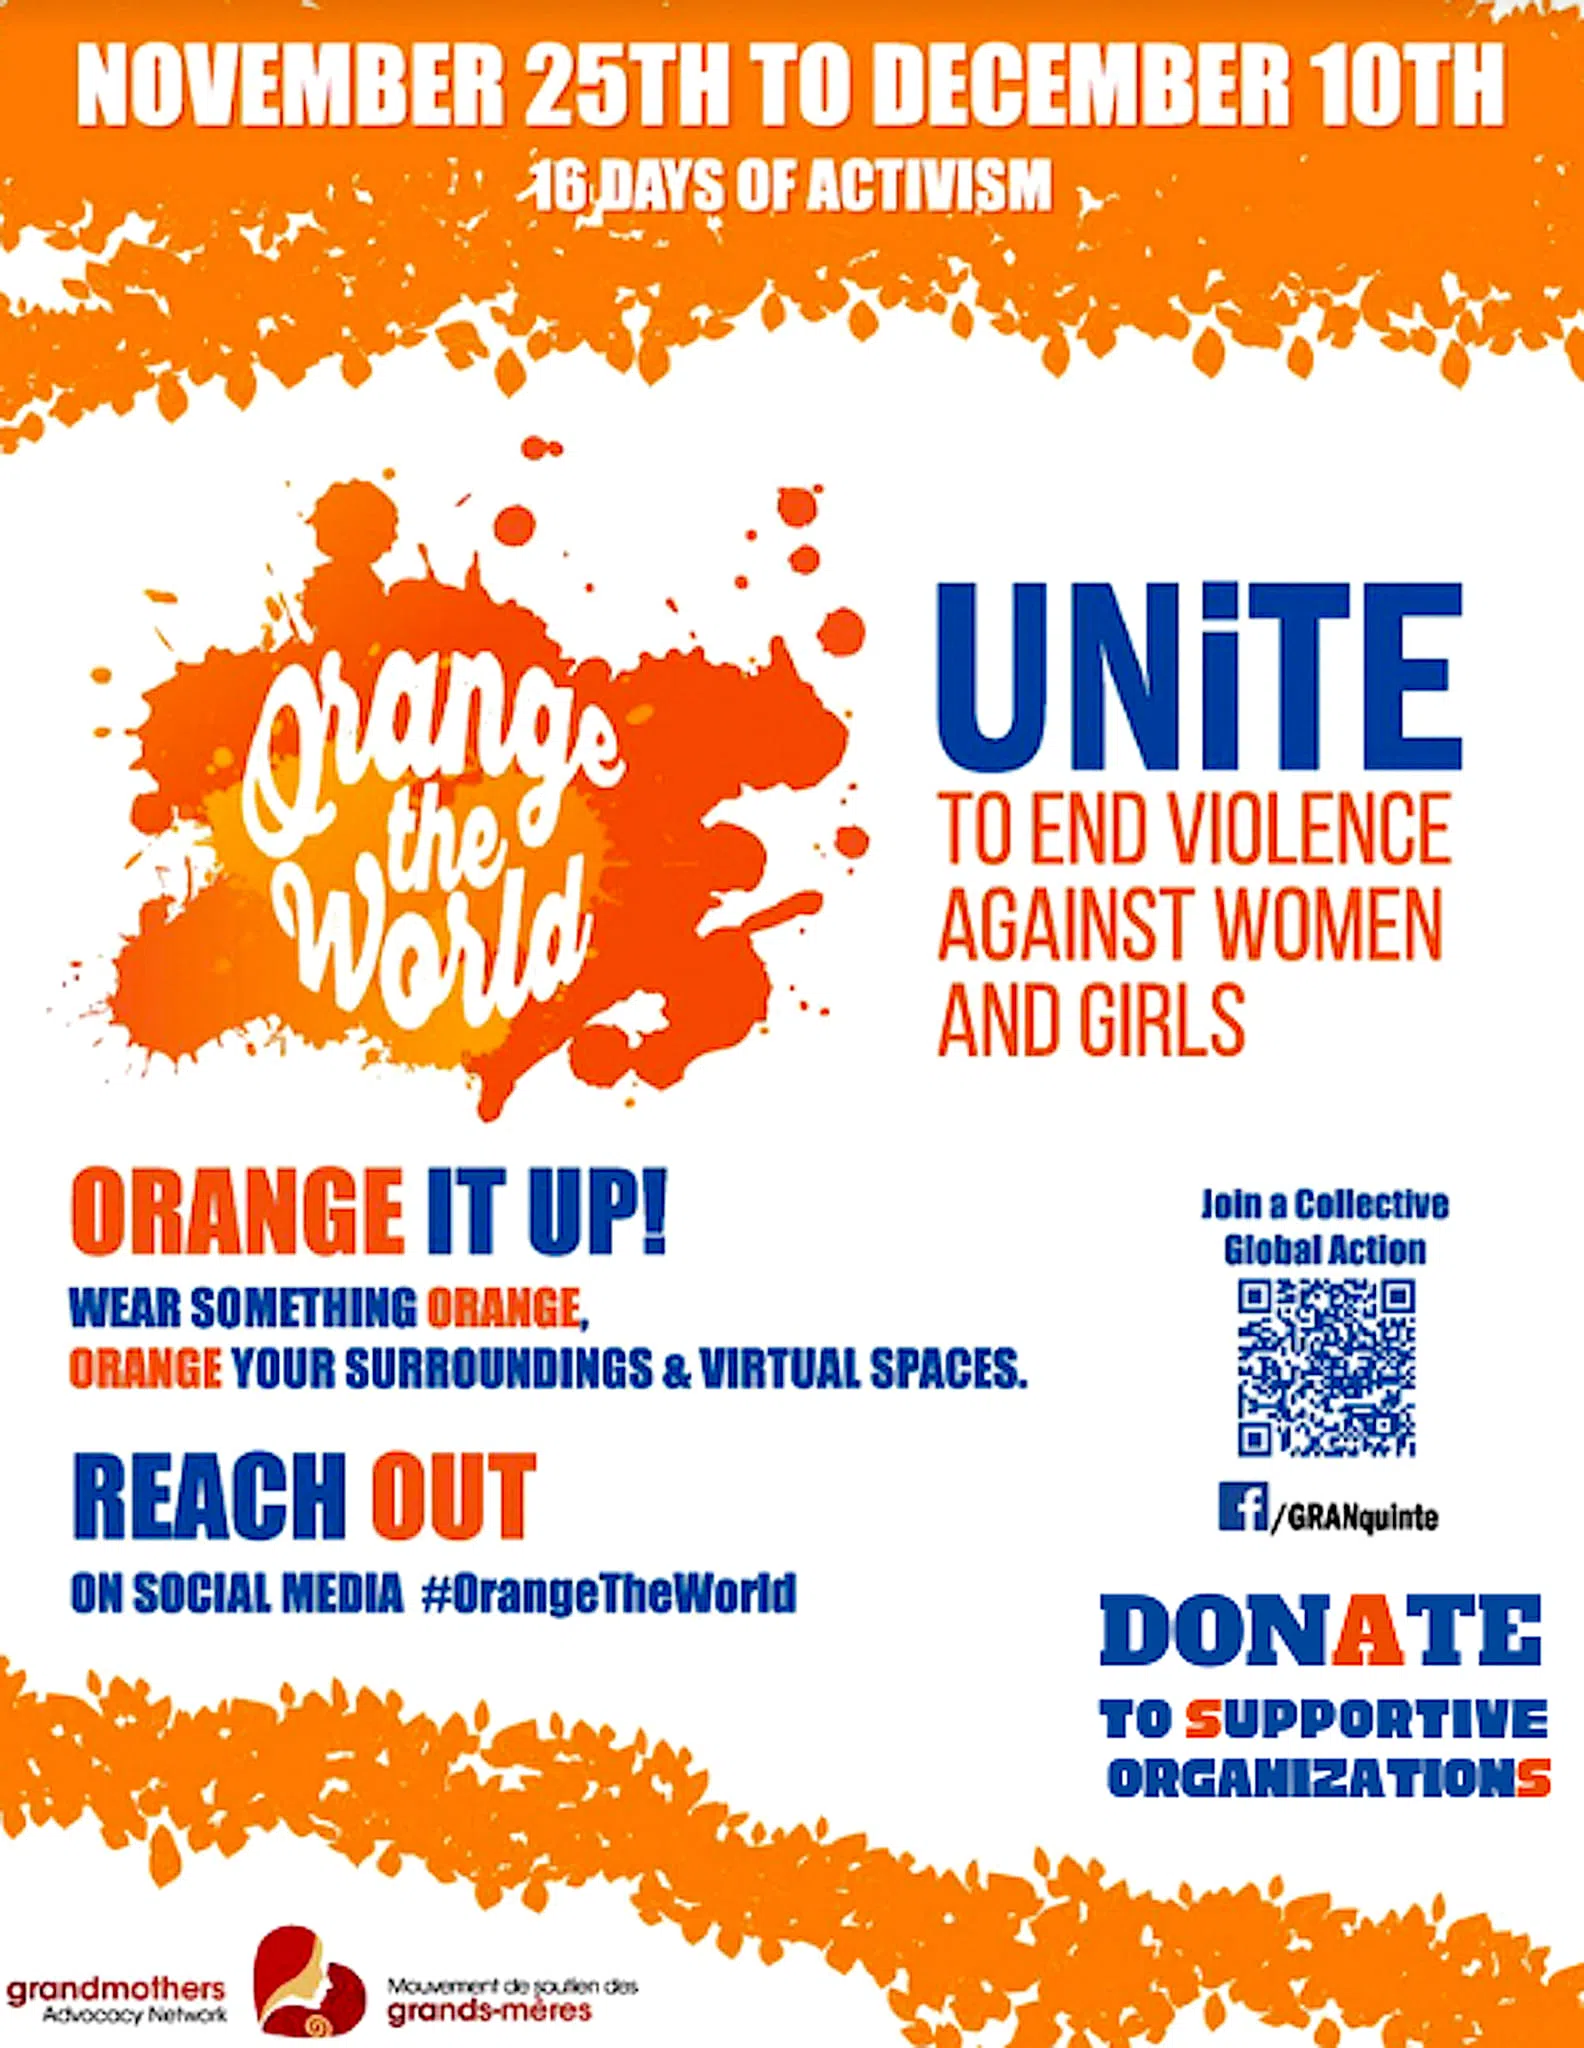 GRANquinte encourages everyone to Unite to end violence against women and girls